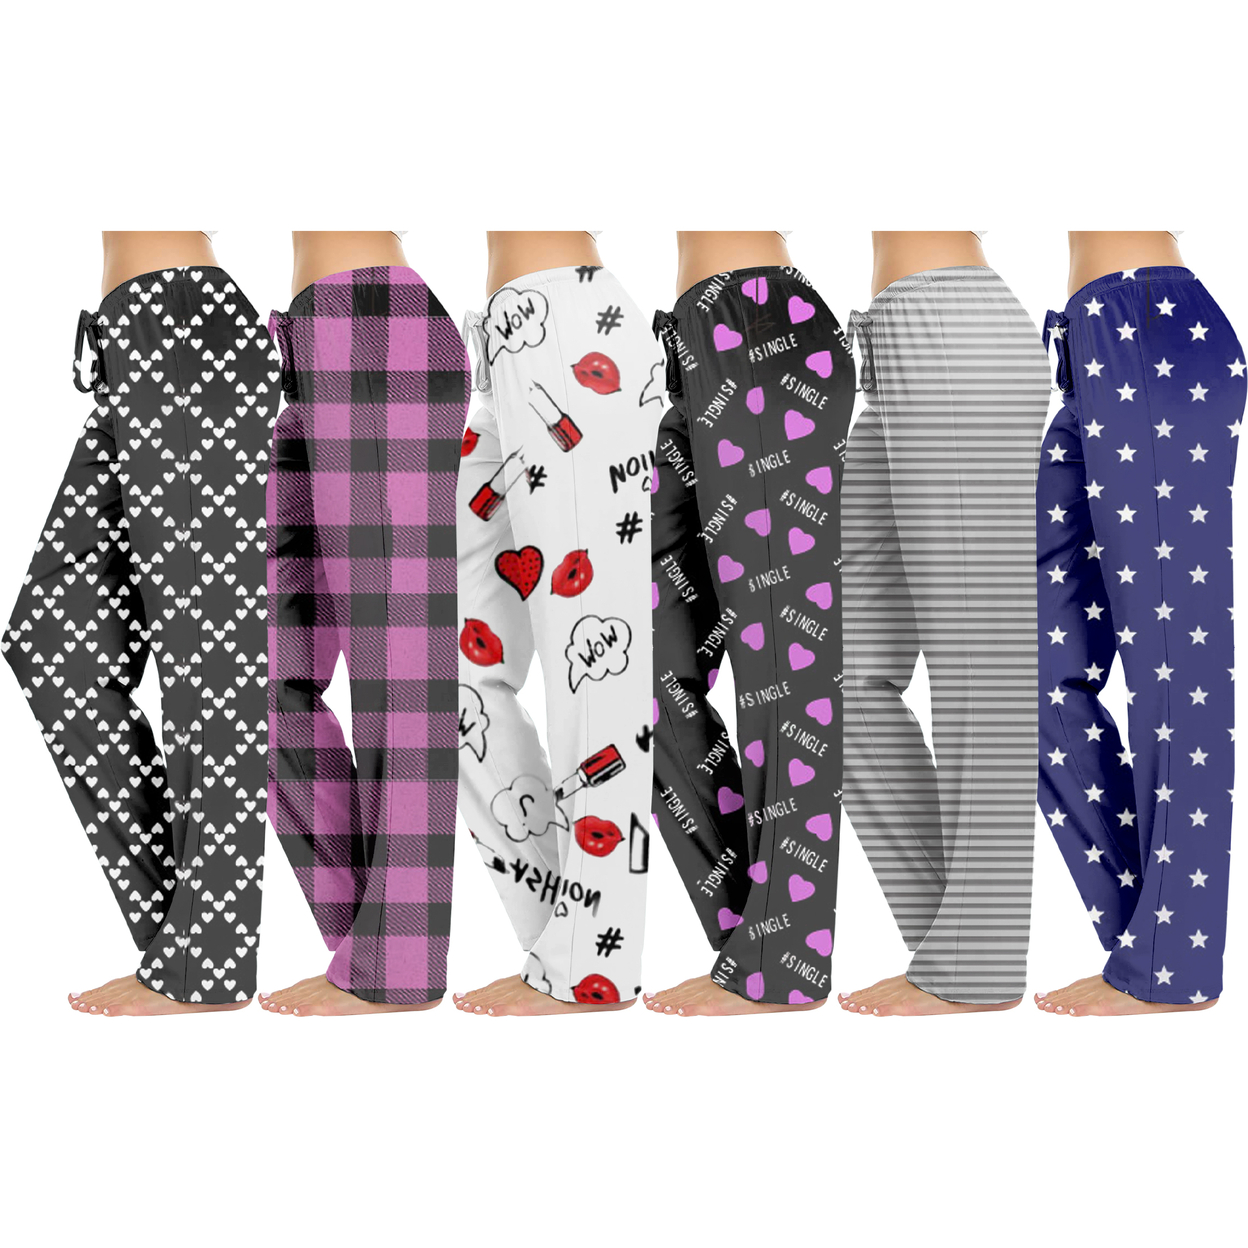 Women's Casual Fun Printed Soft Lightweight Lounge Terry Knit Pajama Bottom Pants - Large, Shapes